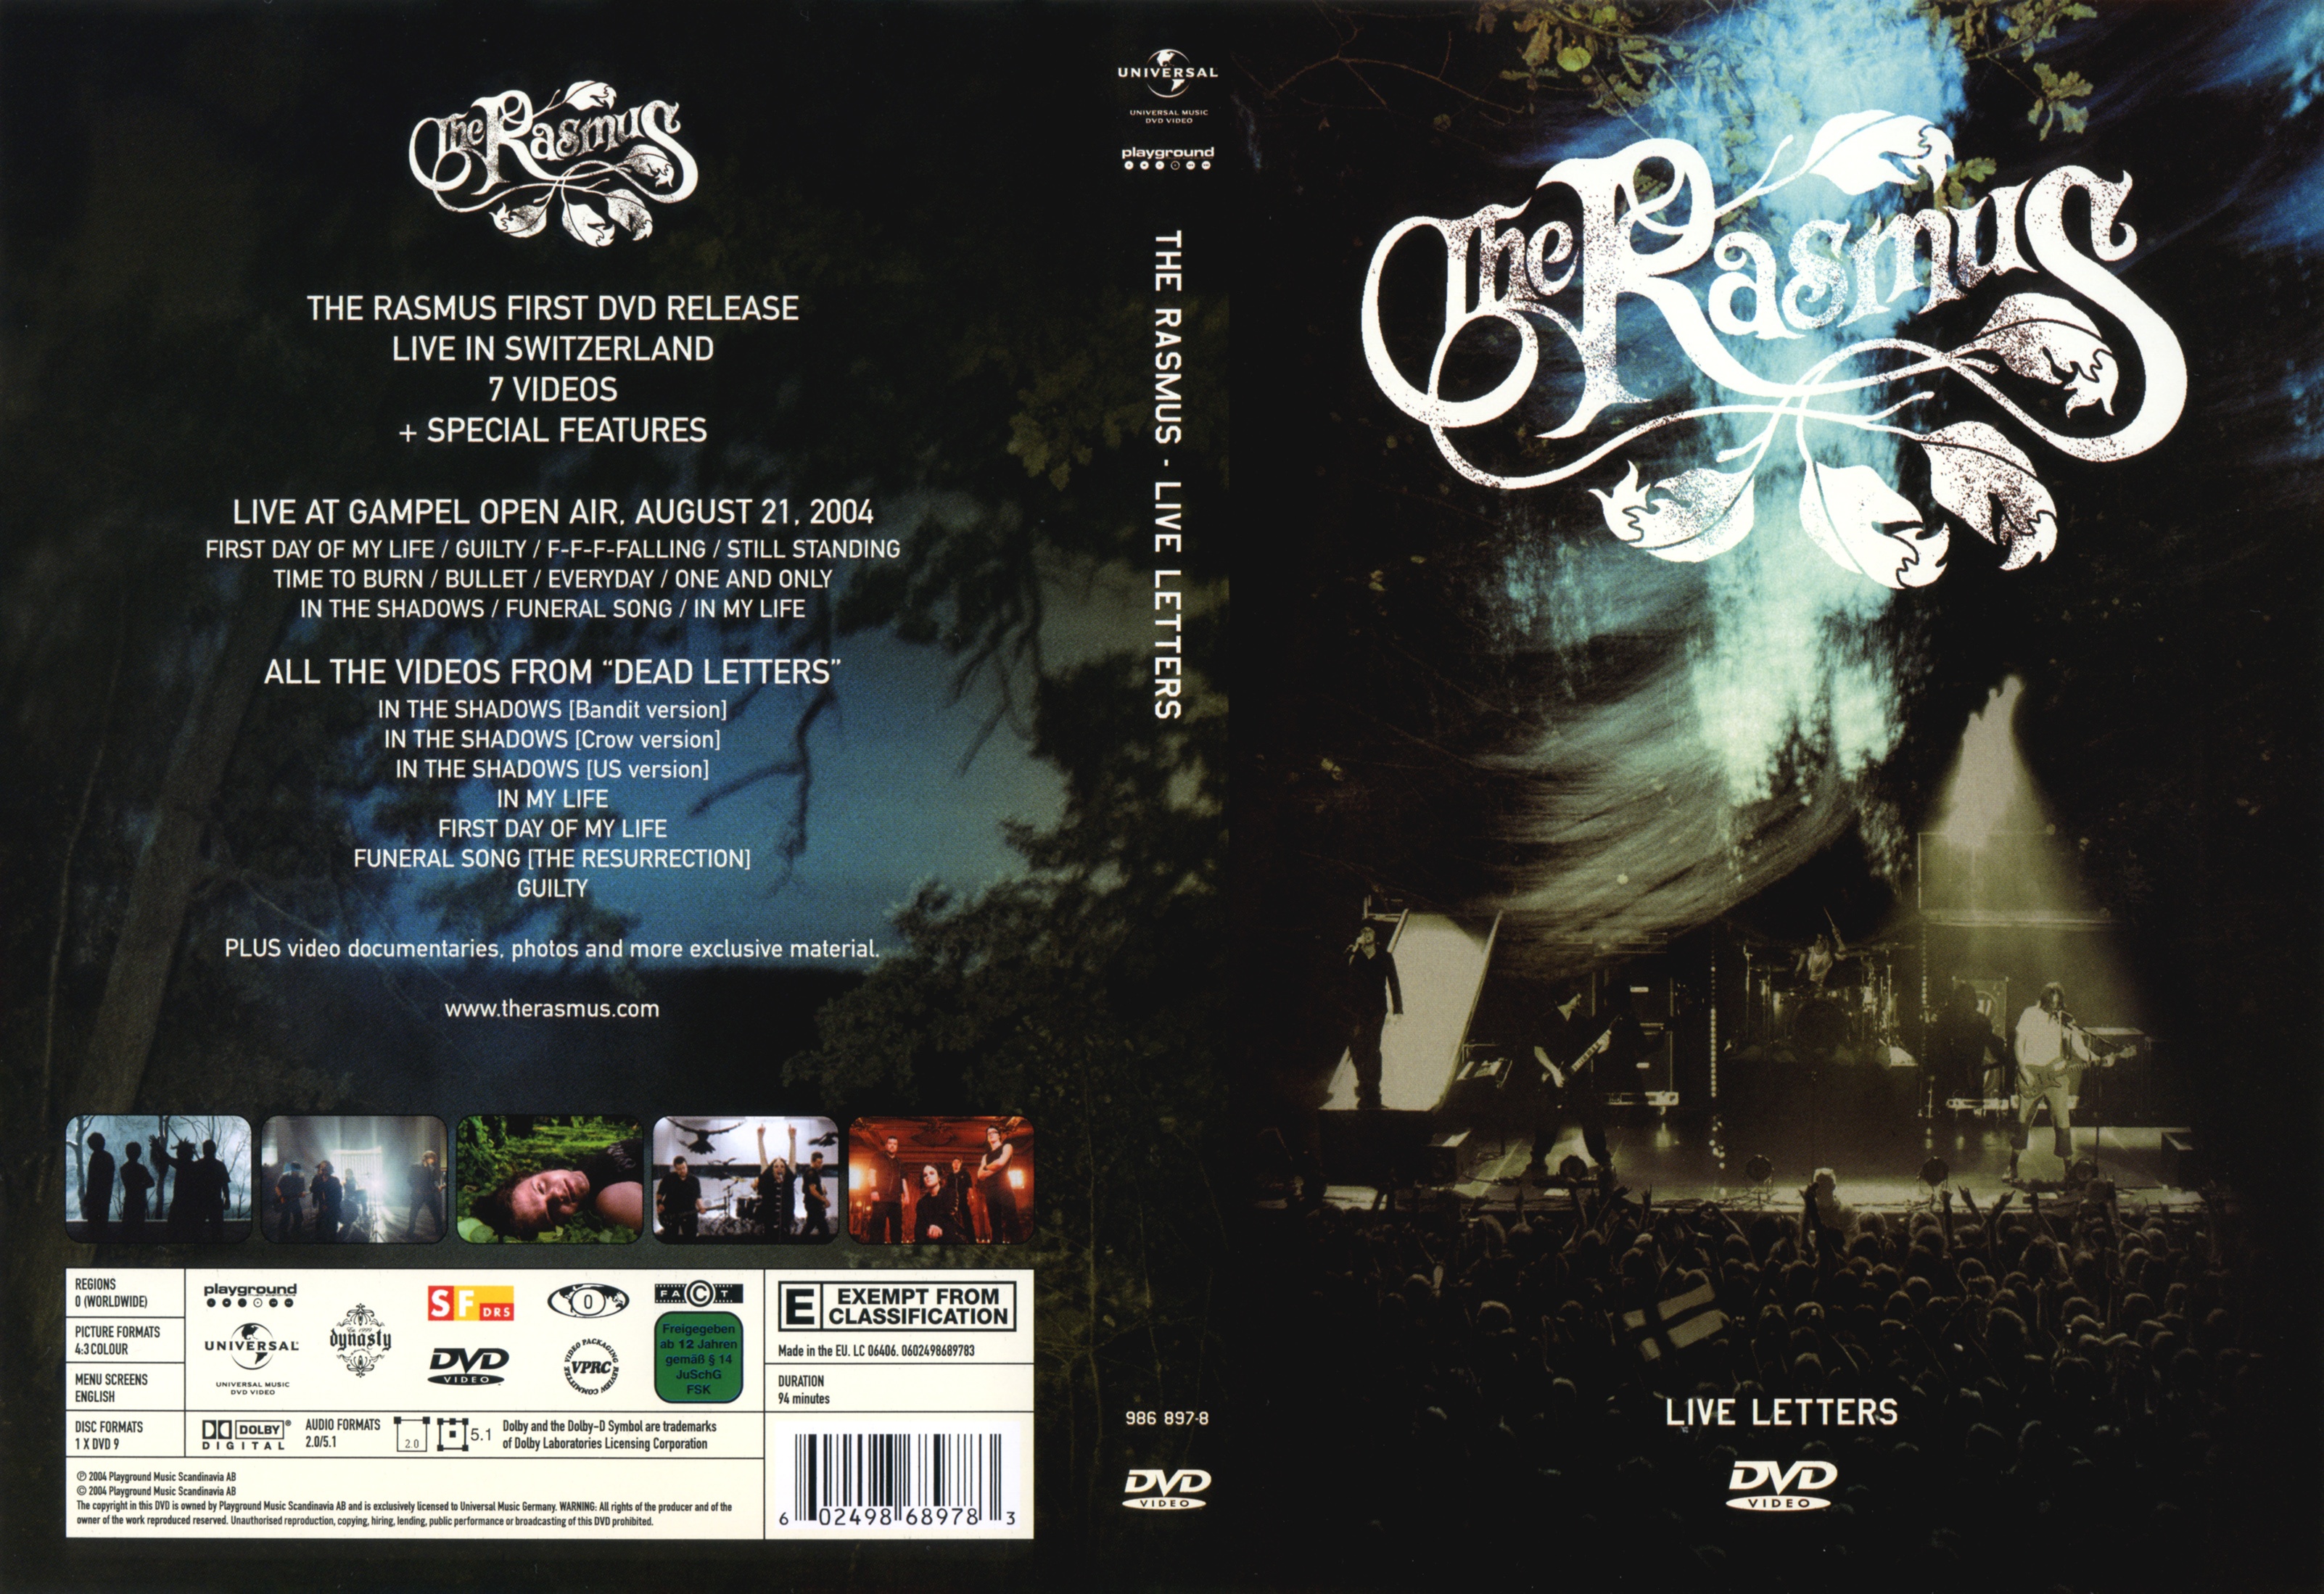 Jaquette DVD The rasmus Live letters